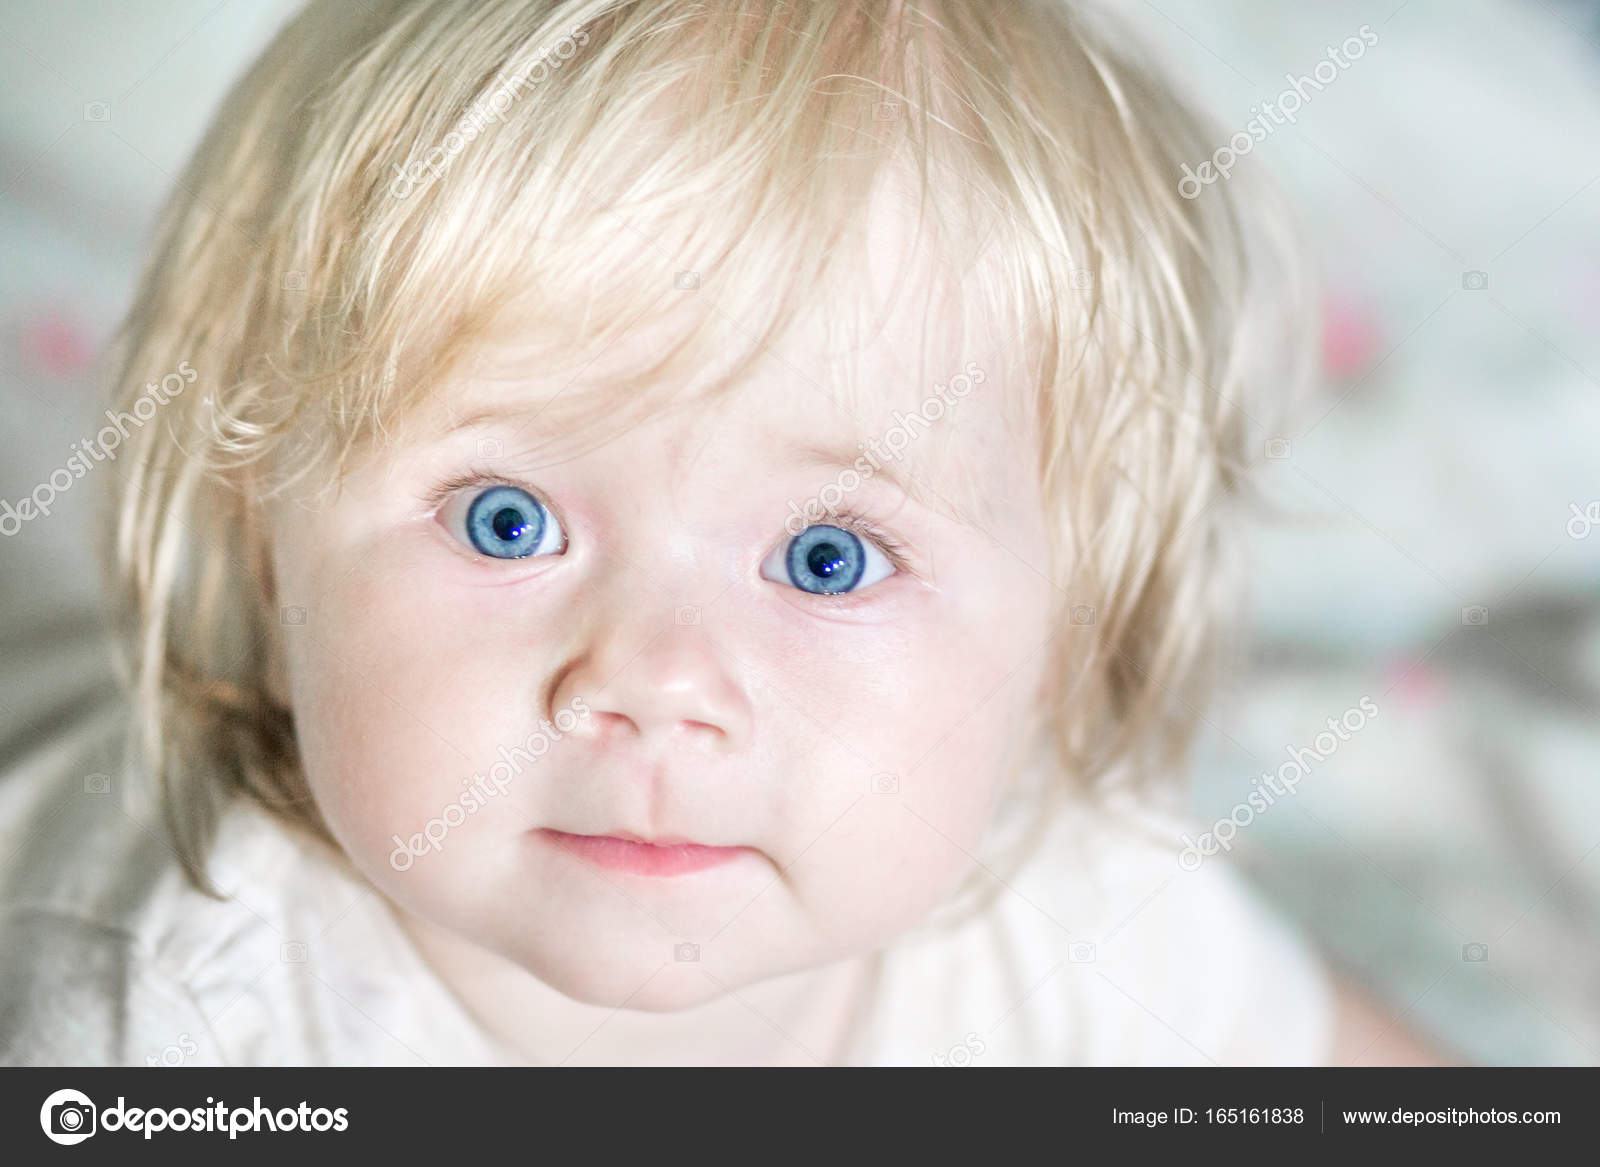 A Little Cute Baby With Blue Eyes Stock Photo C Yuriiz 165161838